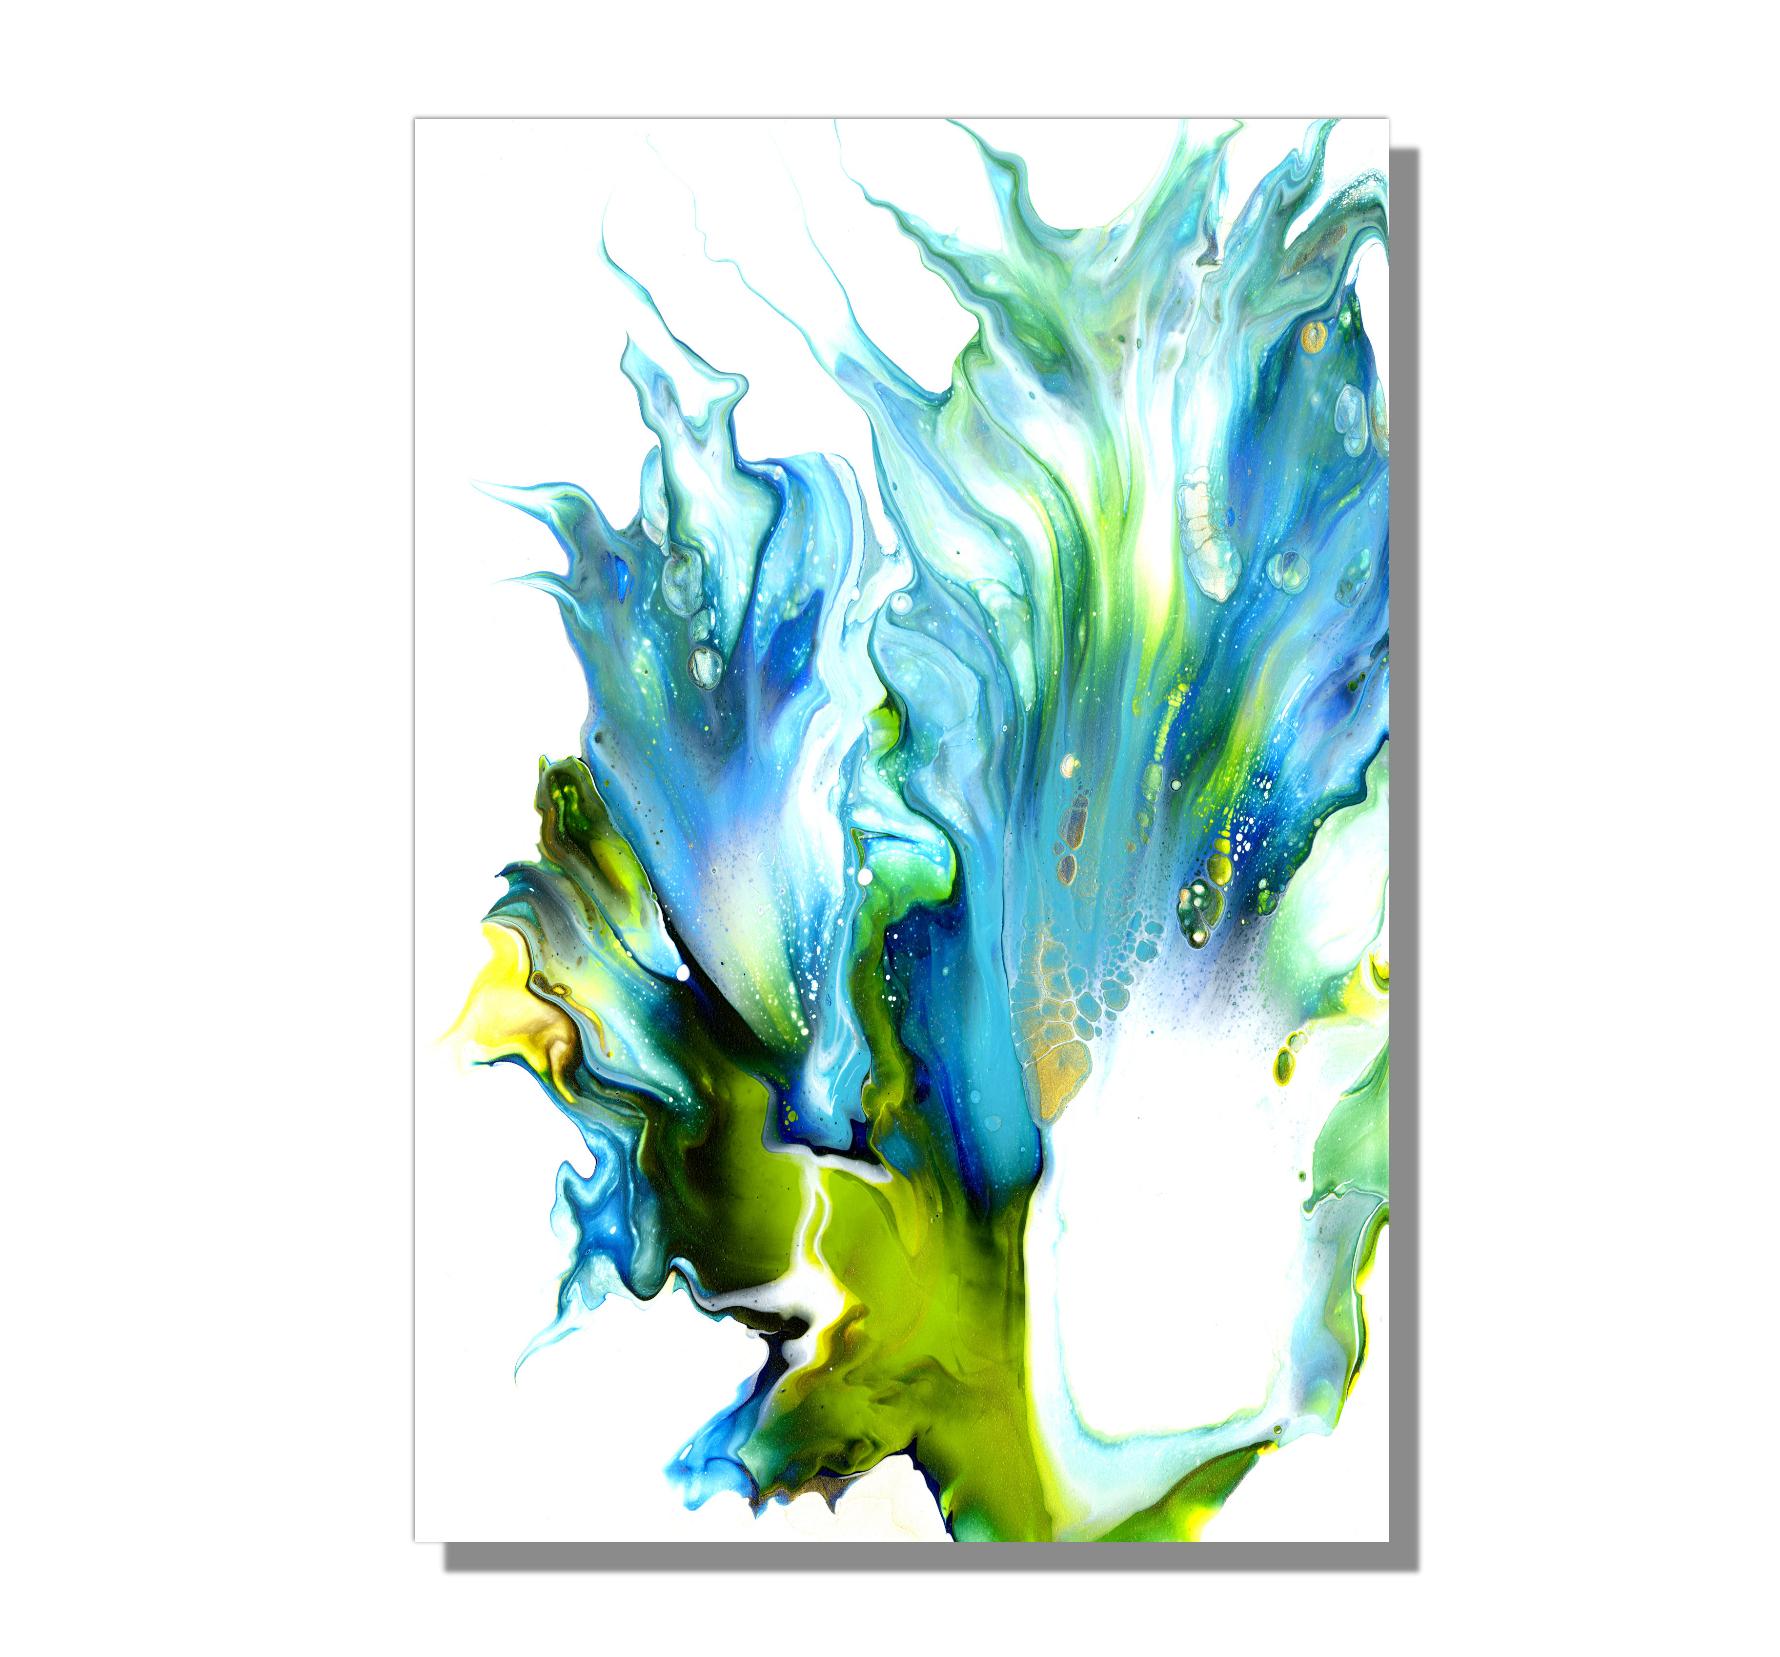 This contemporary modern abstract painting is printed on a lightweight metal composite and comes ready to hang. This vibrant composition can be hung both indoor and outdoor as it is weather resistant.

-Artist: "Cessy" 
LIMITED EDITION; 1 of